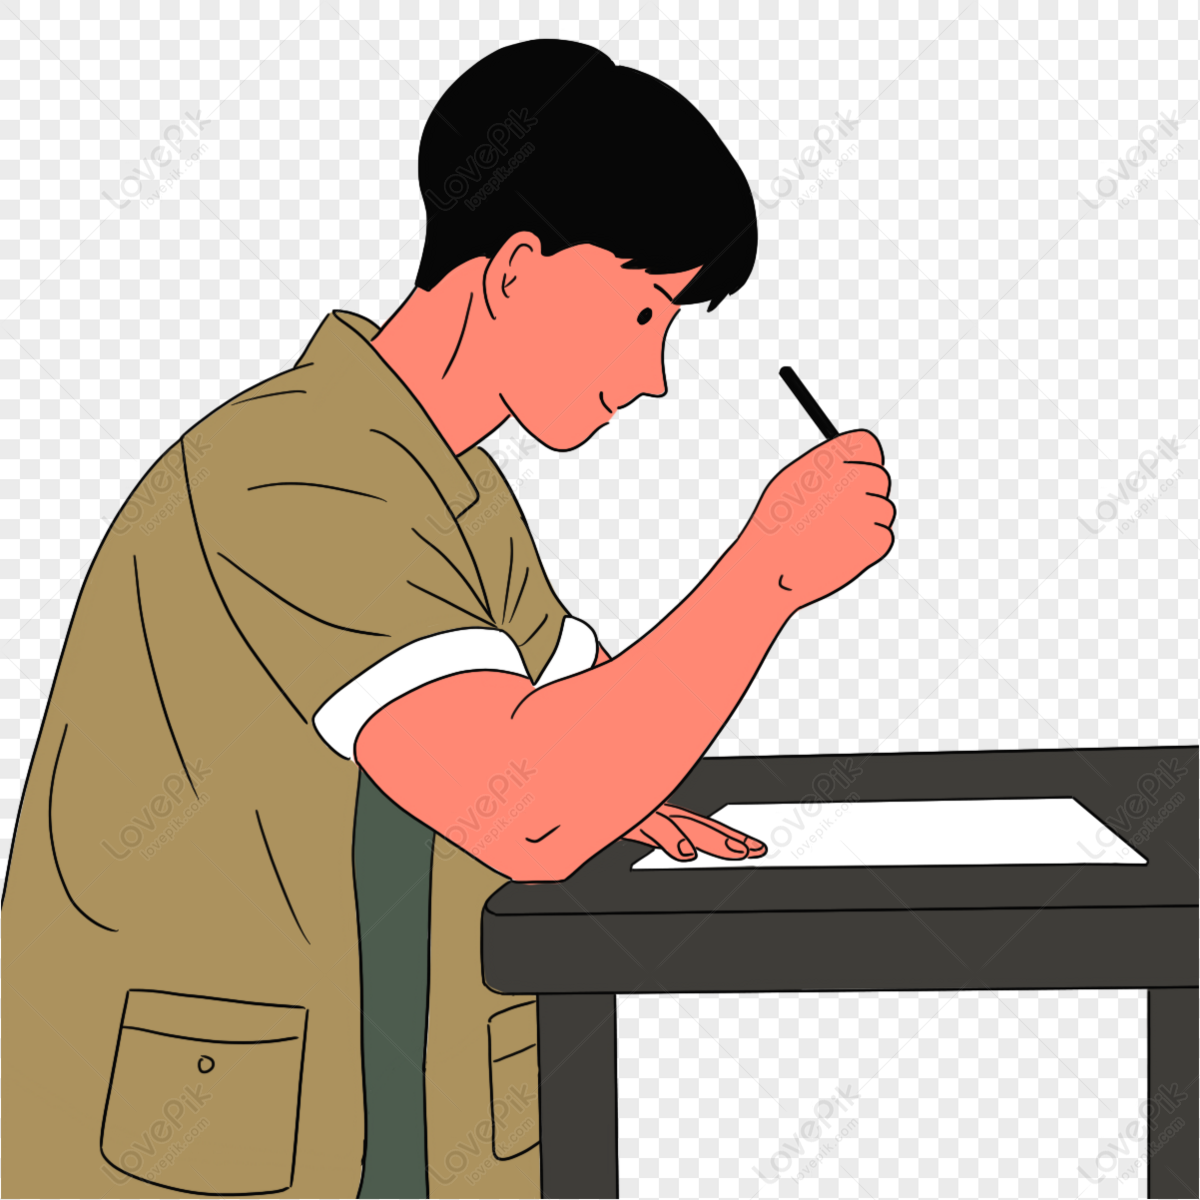 Writing Man PNG Image Free Download And Clipart Image For Free Download -  Lovepik | 401502981